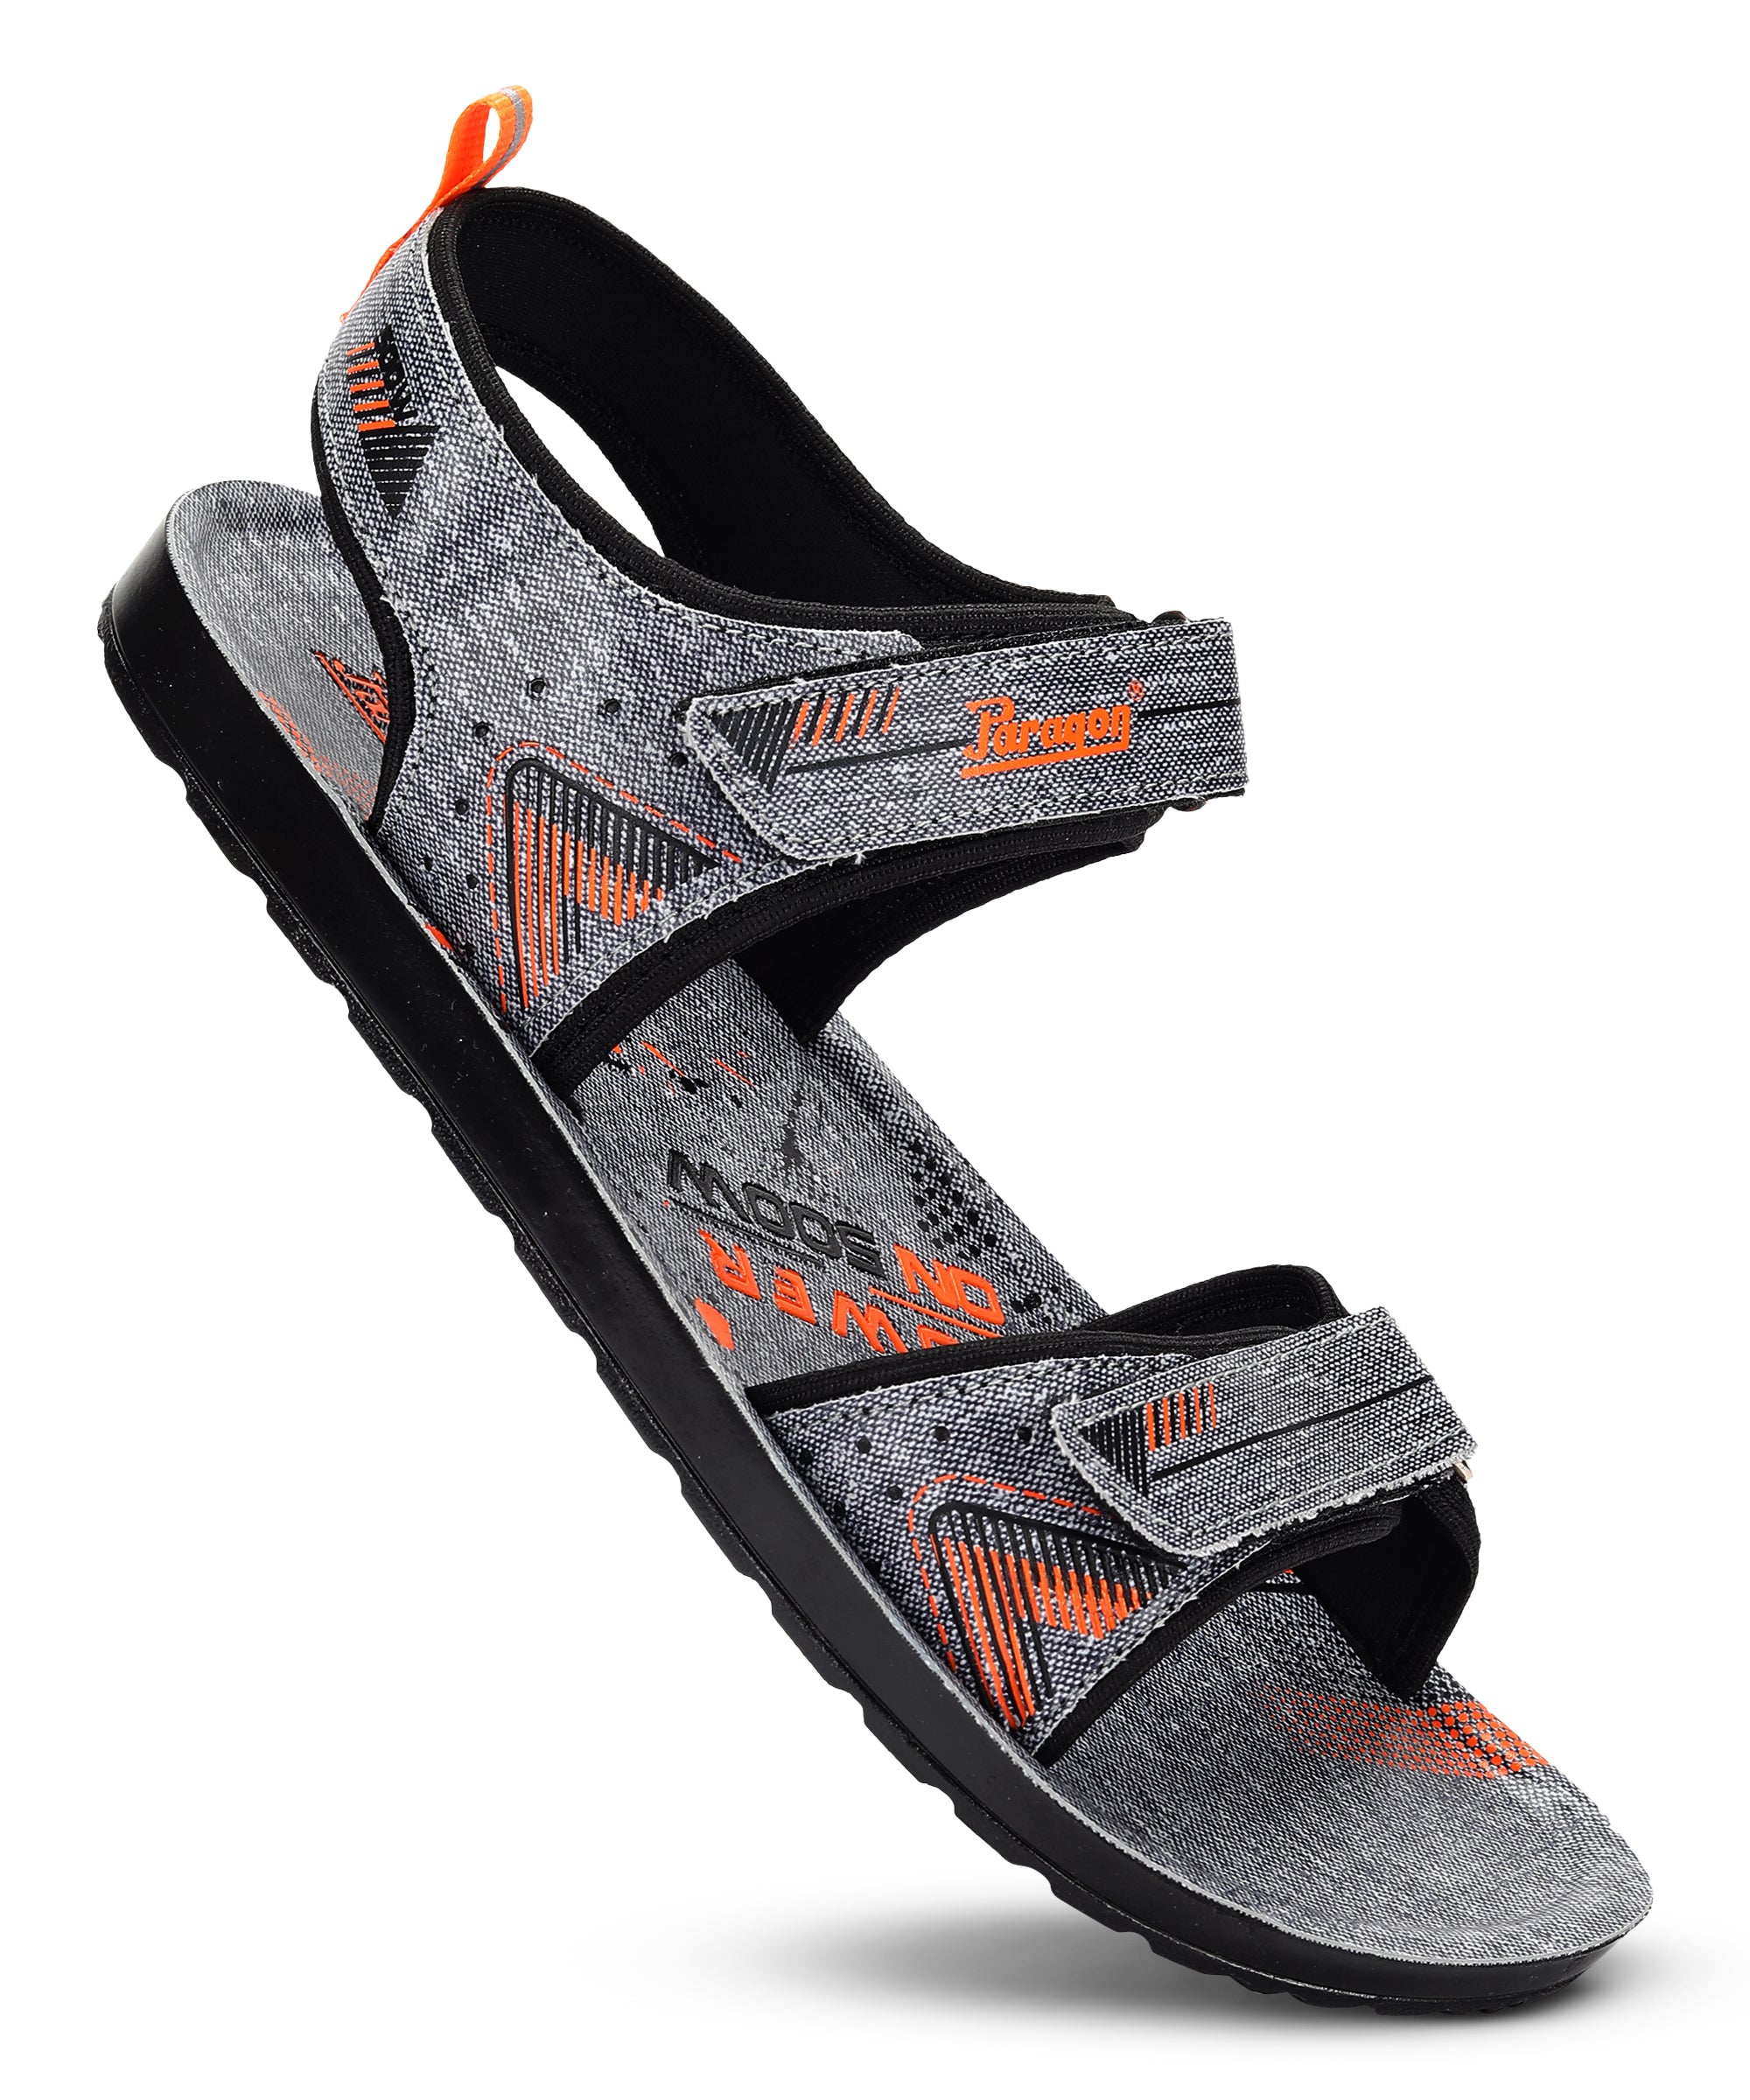 Paragon PUK2214G Men Stylish Sandals | Comfortable Sandals for Daily Outdoor Use | Casual Formal Sandals with Cushioned Soles